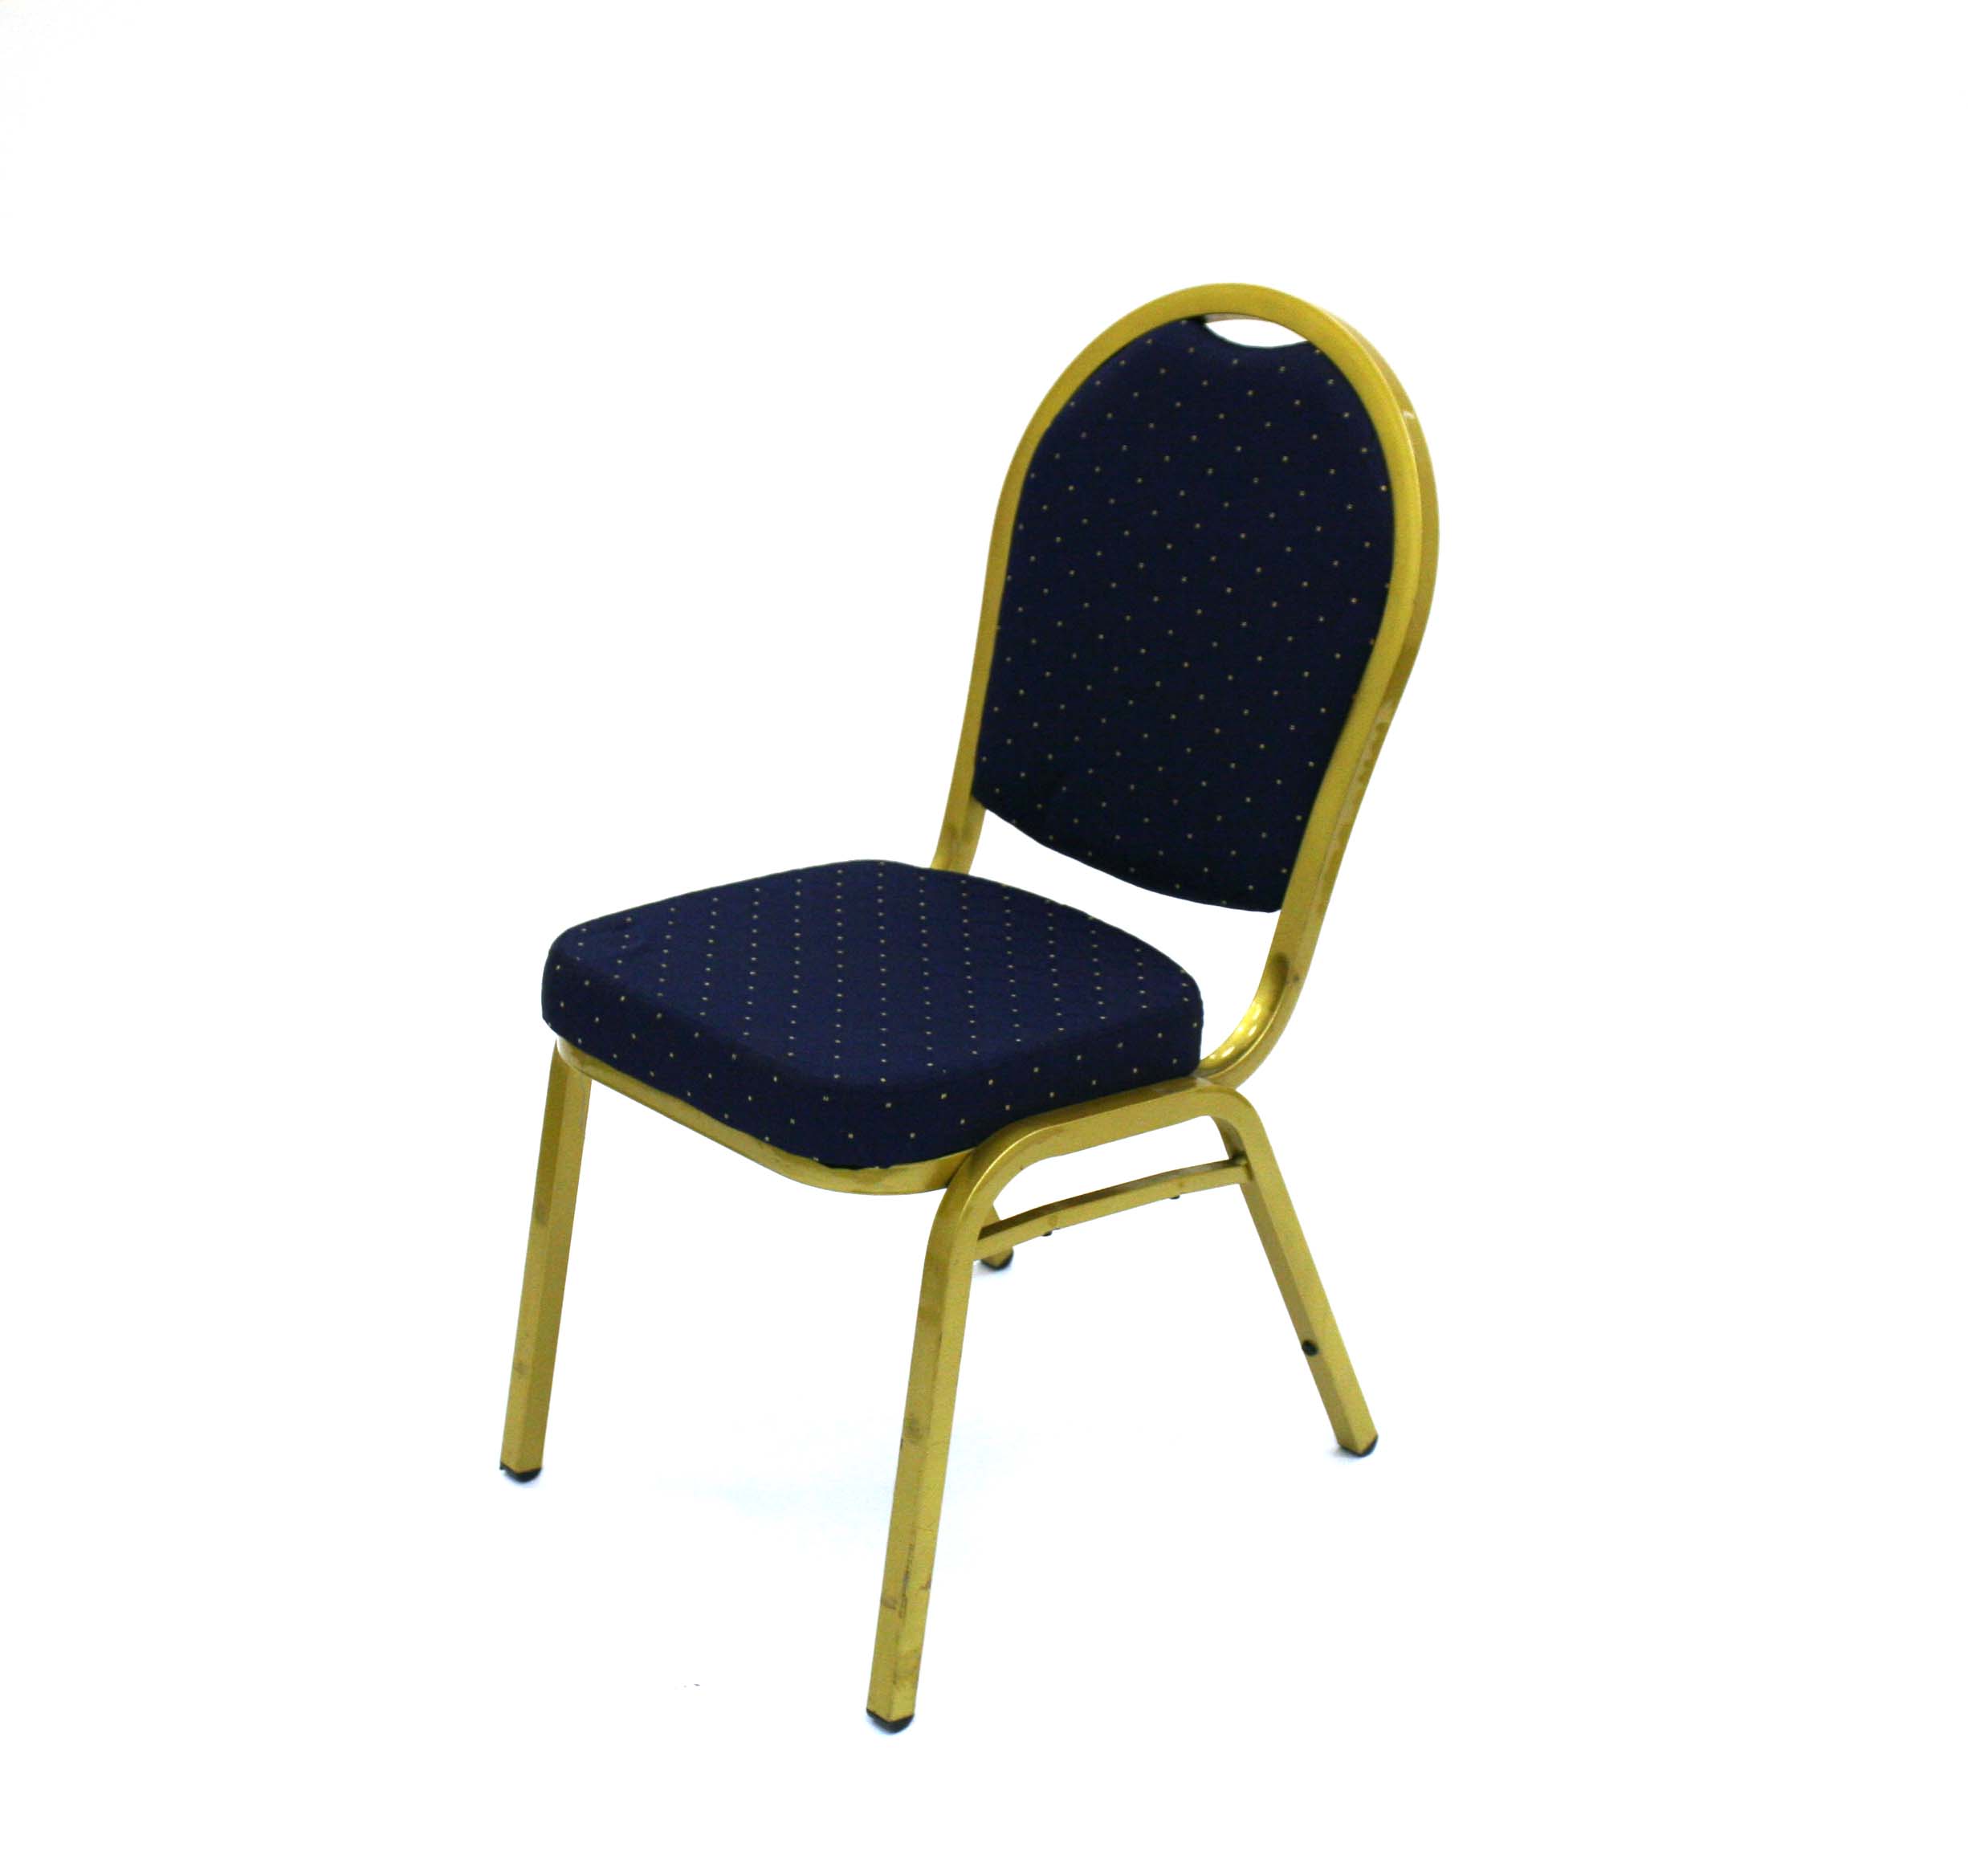 Ex hire gold steel framed chair with a dark blue padded seat & back - BE Event Hire